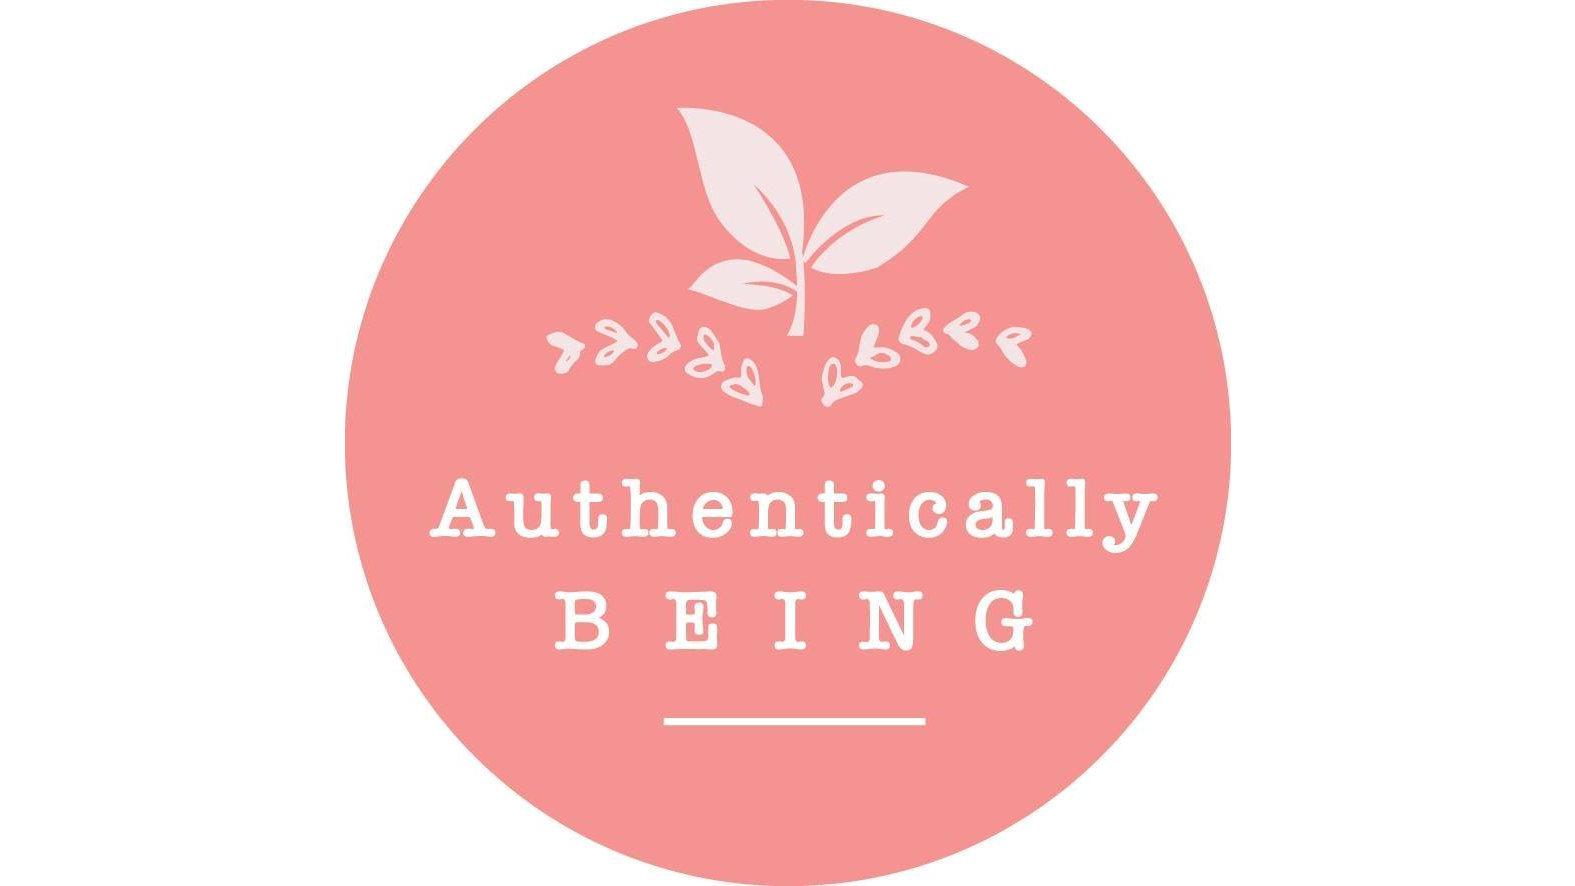 Authentically Being